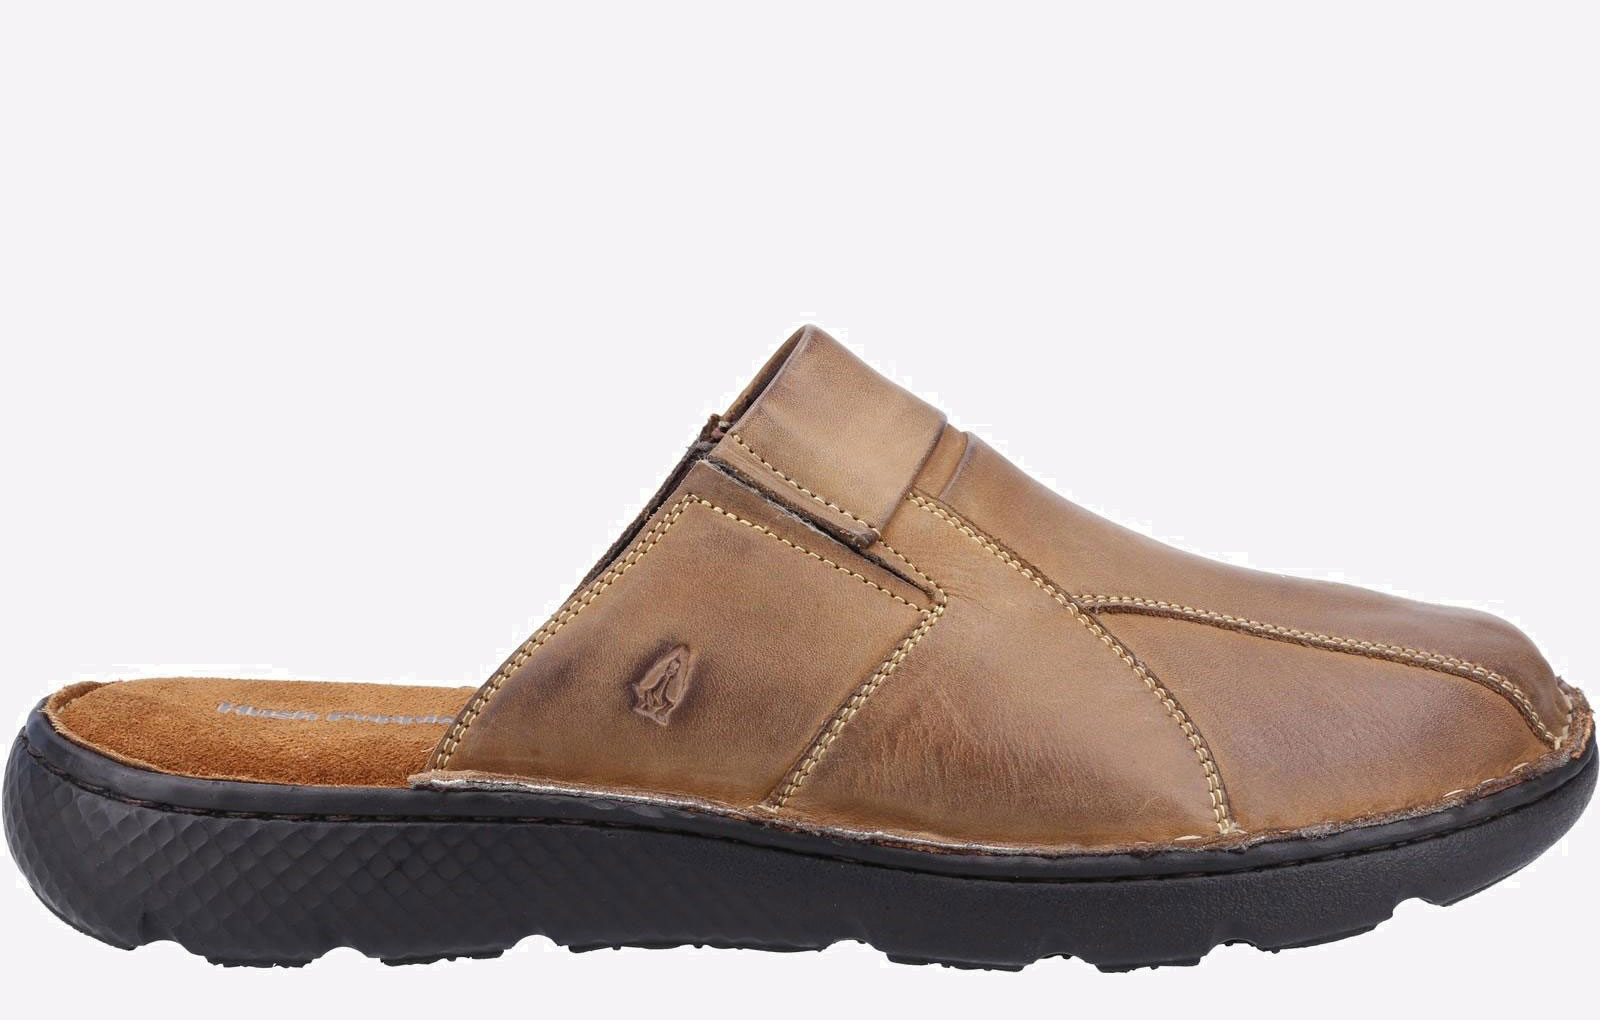 Hush Puppies Carson Mule Leather Sandal Mens - GRD-34268-59044-12